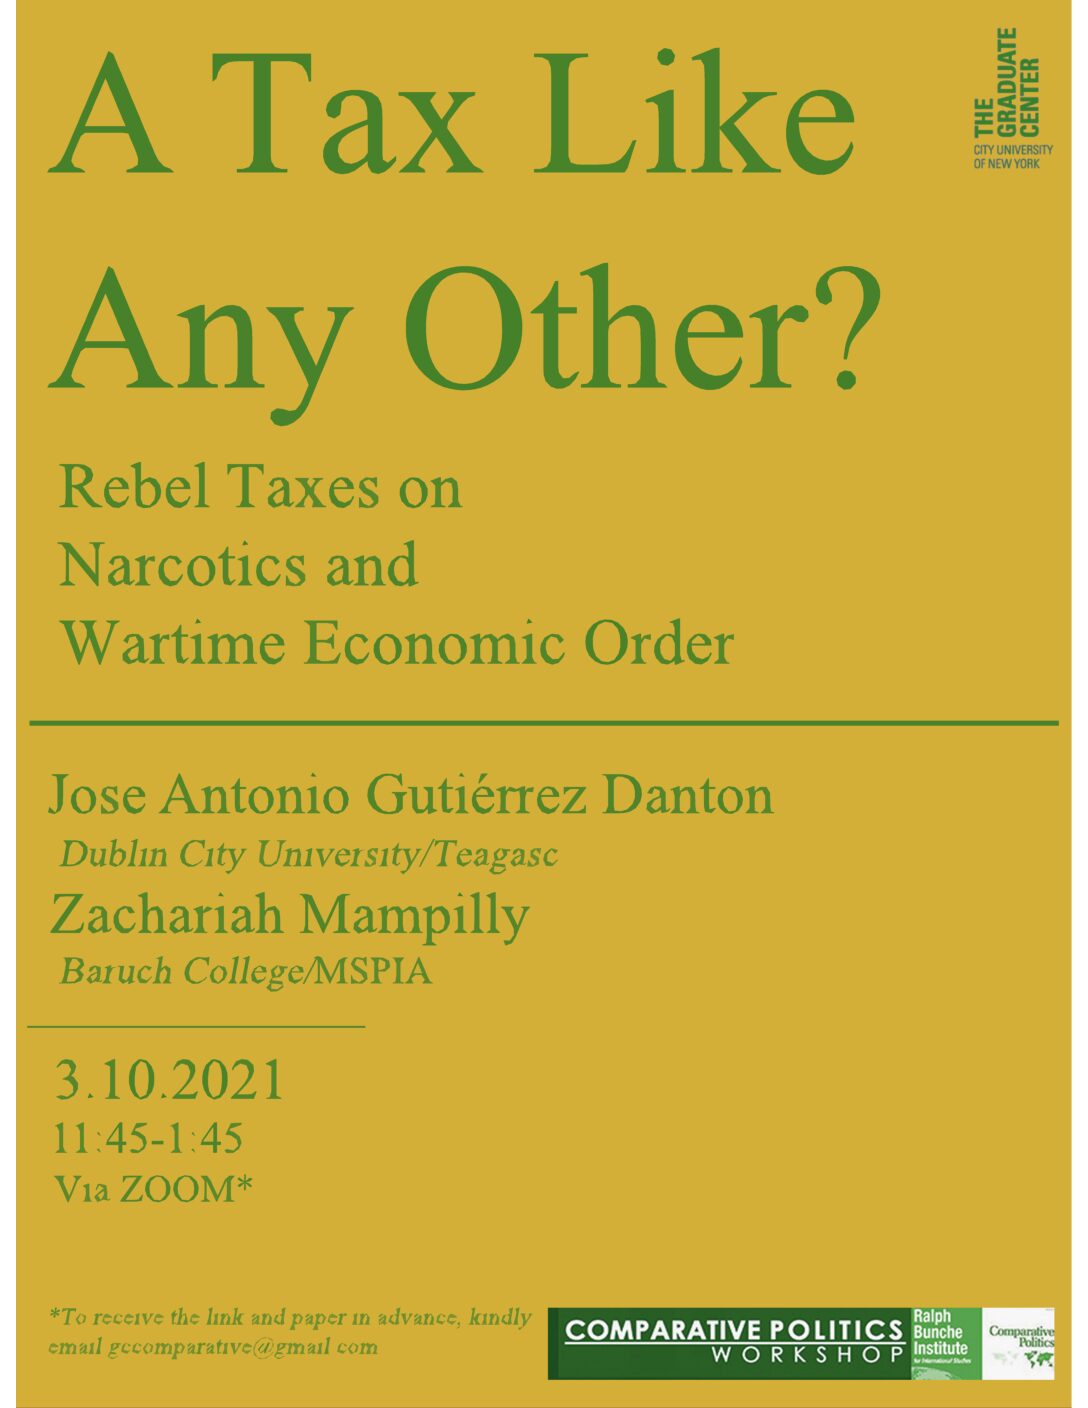 Comparative Politics Workshop: José Antonio Gutiérrez Danton and Zachariah Mampilly, "A Tax Like Any Other? Rebel Taxes on Narcotics and Wartime Economic Order" Wednesday, March 10, 11:45am-1:45pm